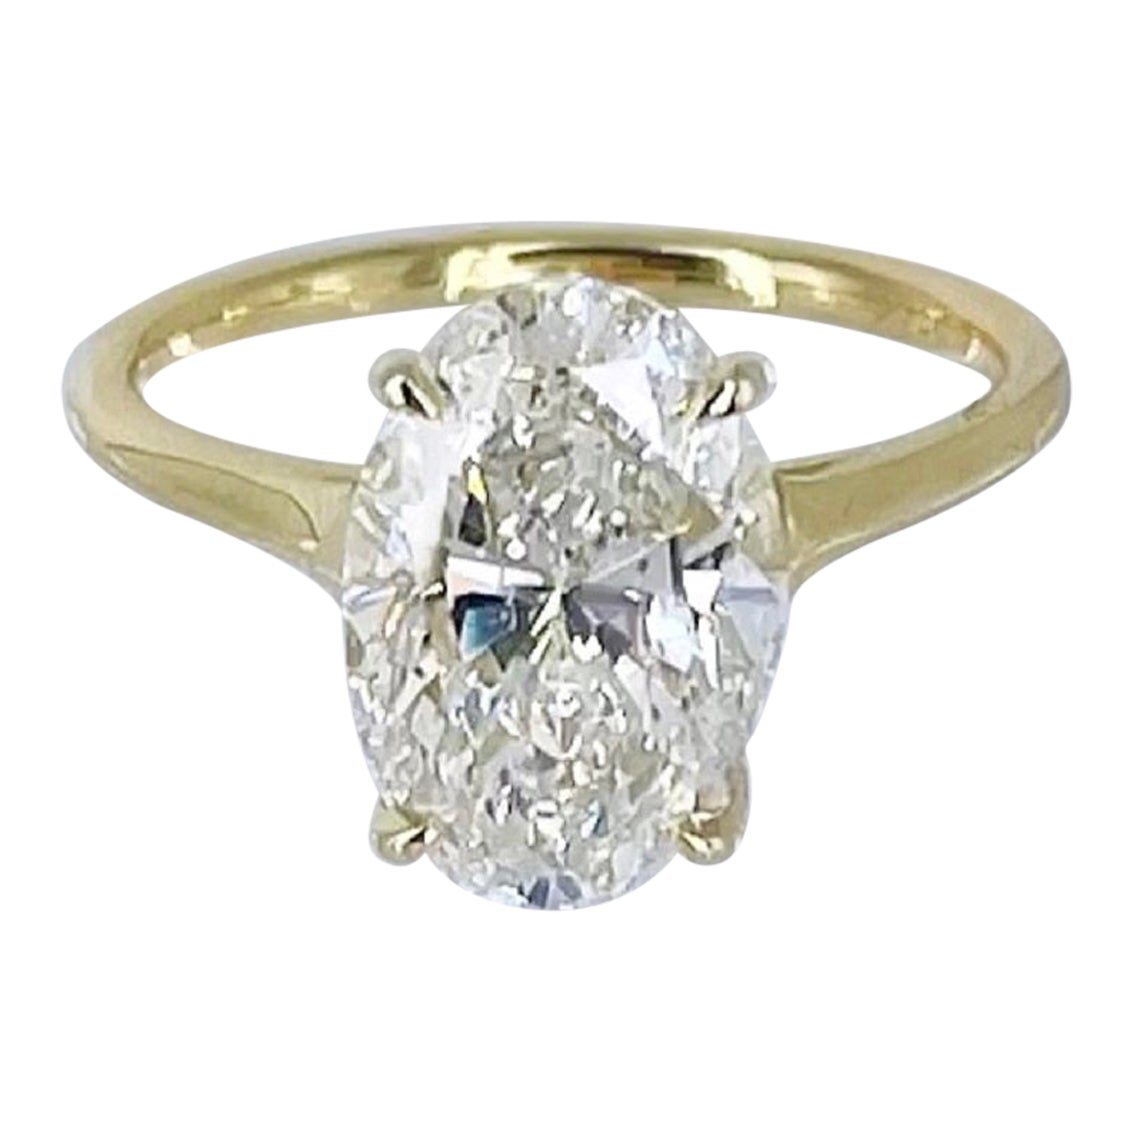 J. Birnbach 3.95 carat Oval Diamond Solitaire Engagement Ring in 14K Yellow Gold